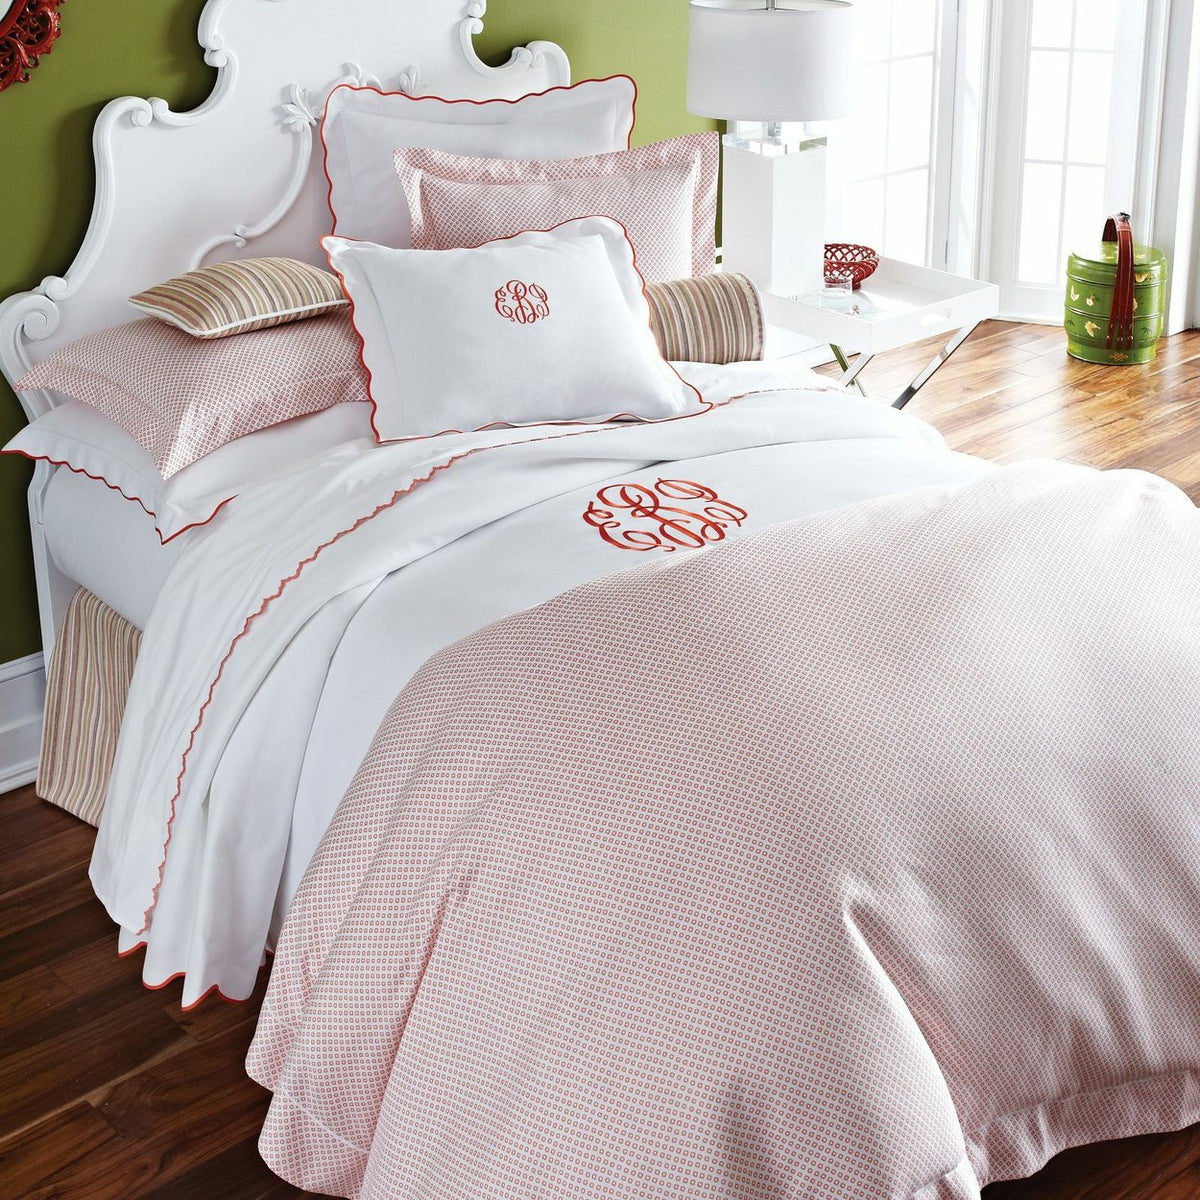 Peacock Alley Emma Bedding Lifestyle 3 Fine Linens